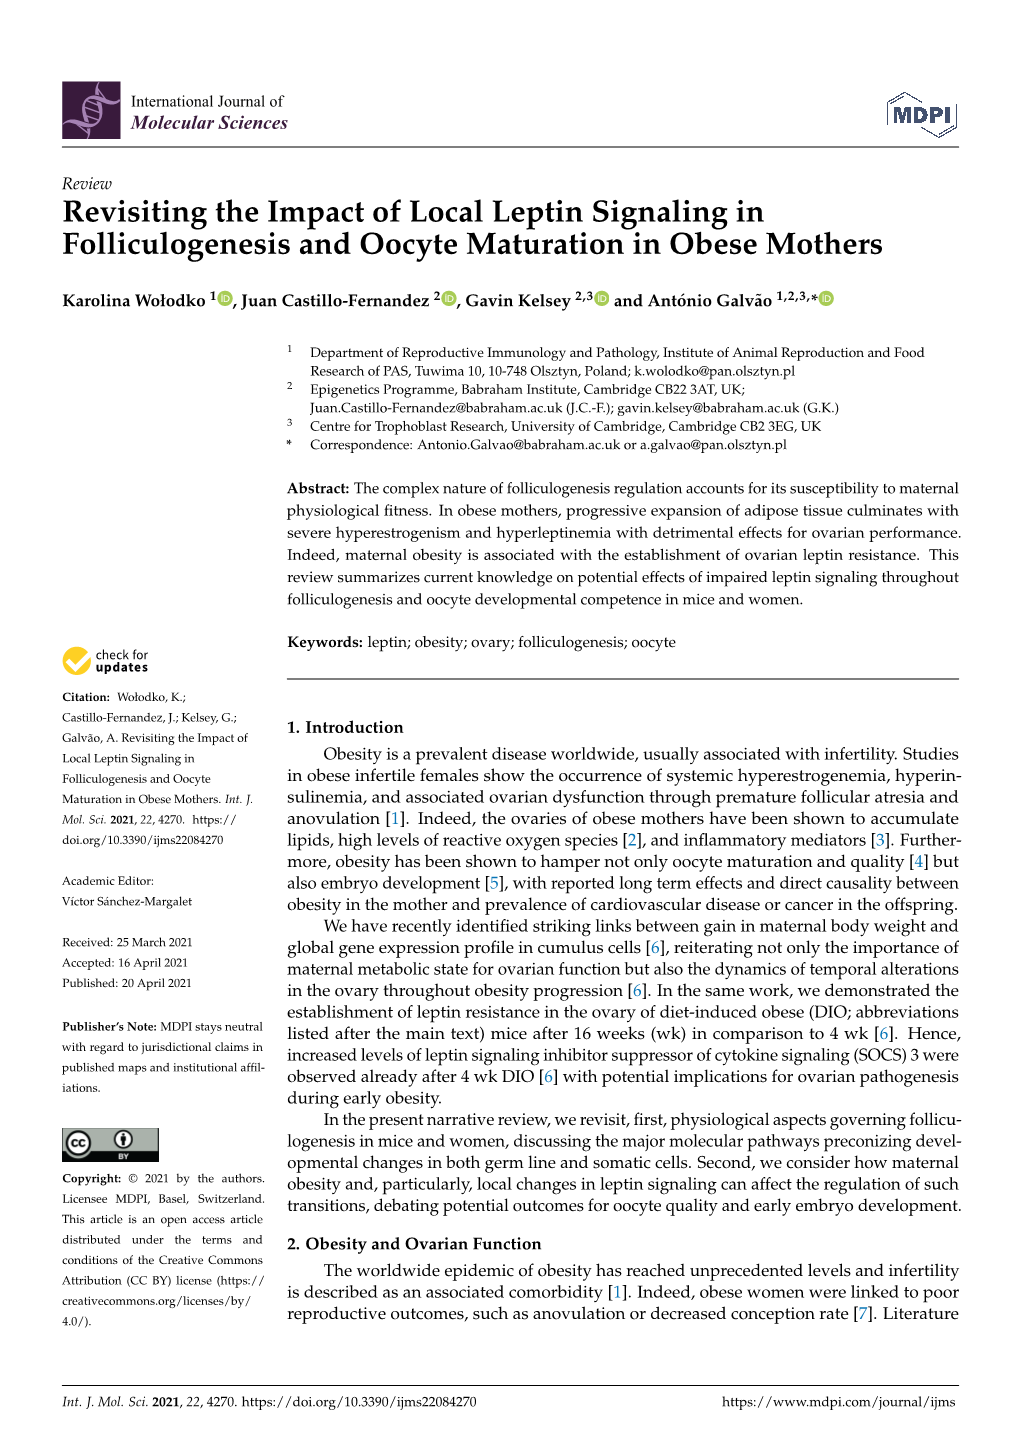 Revisiting the Impact of Local Leptin Signaling in Folliculogenesis and Oocyte Maturation in Obese Mothers